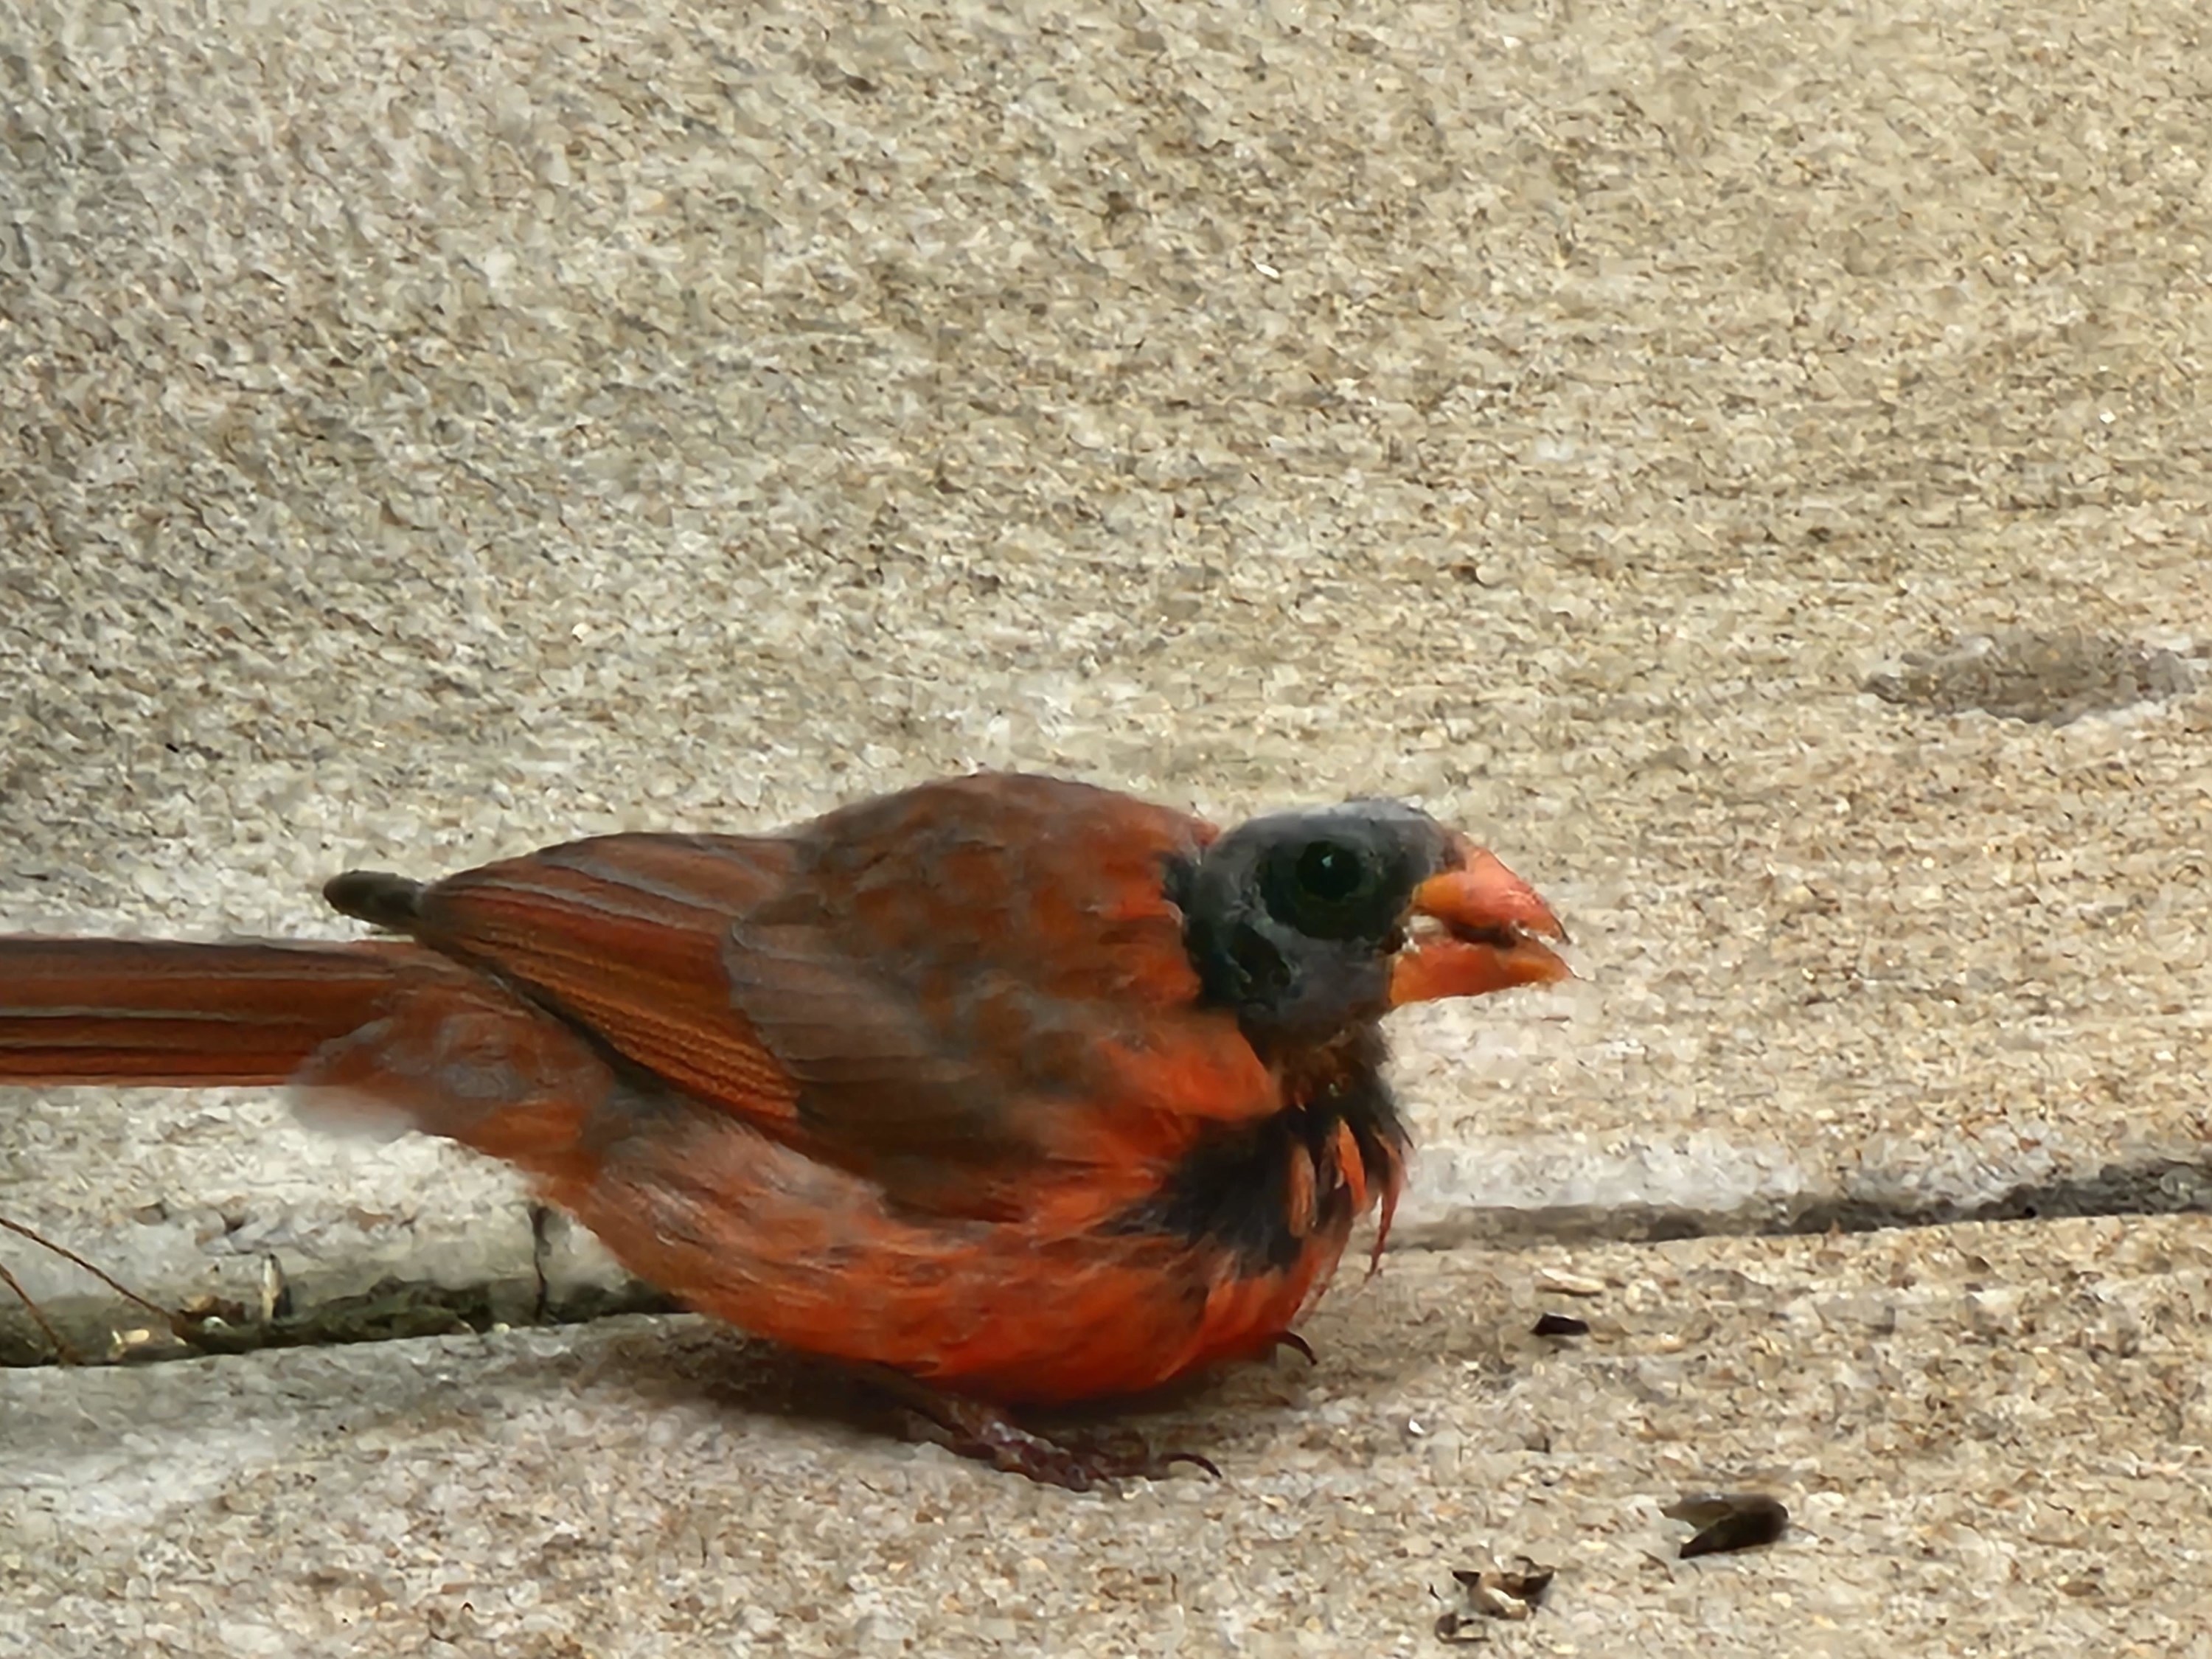 A cardinal without feathers on its head